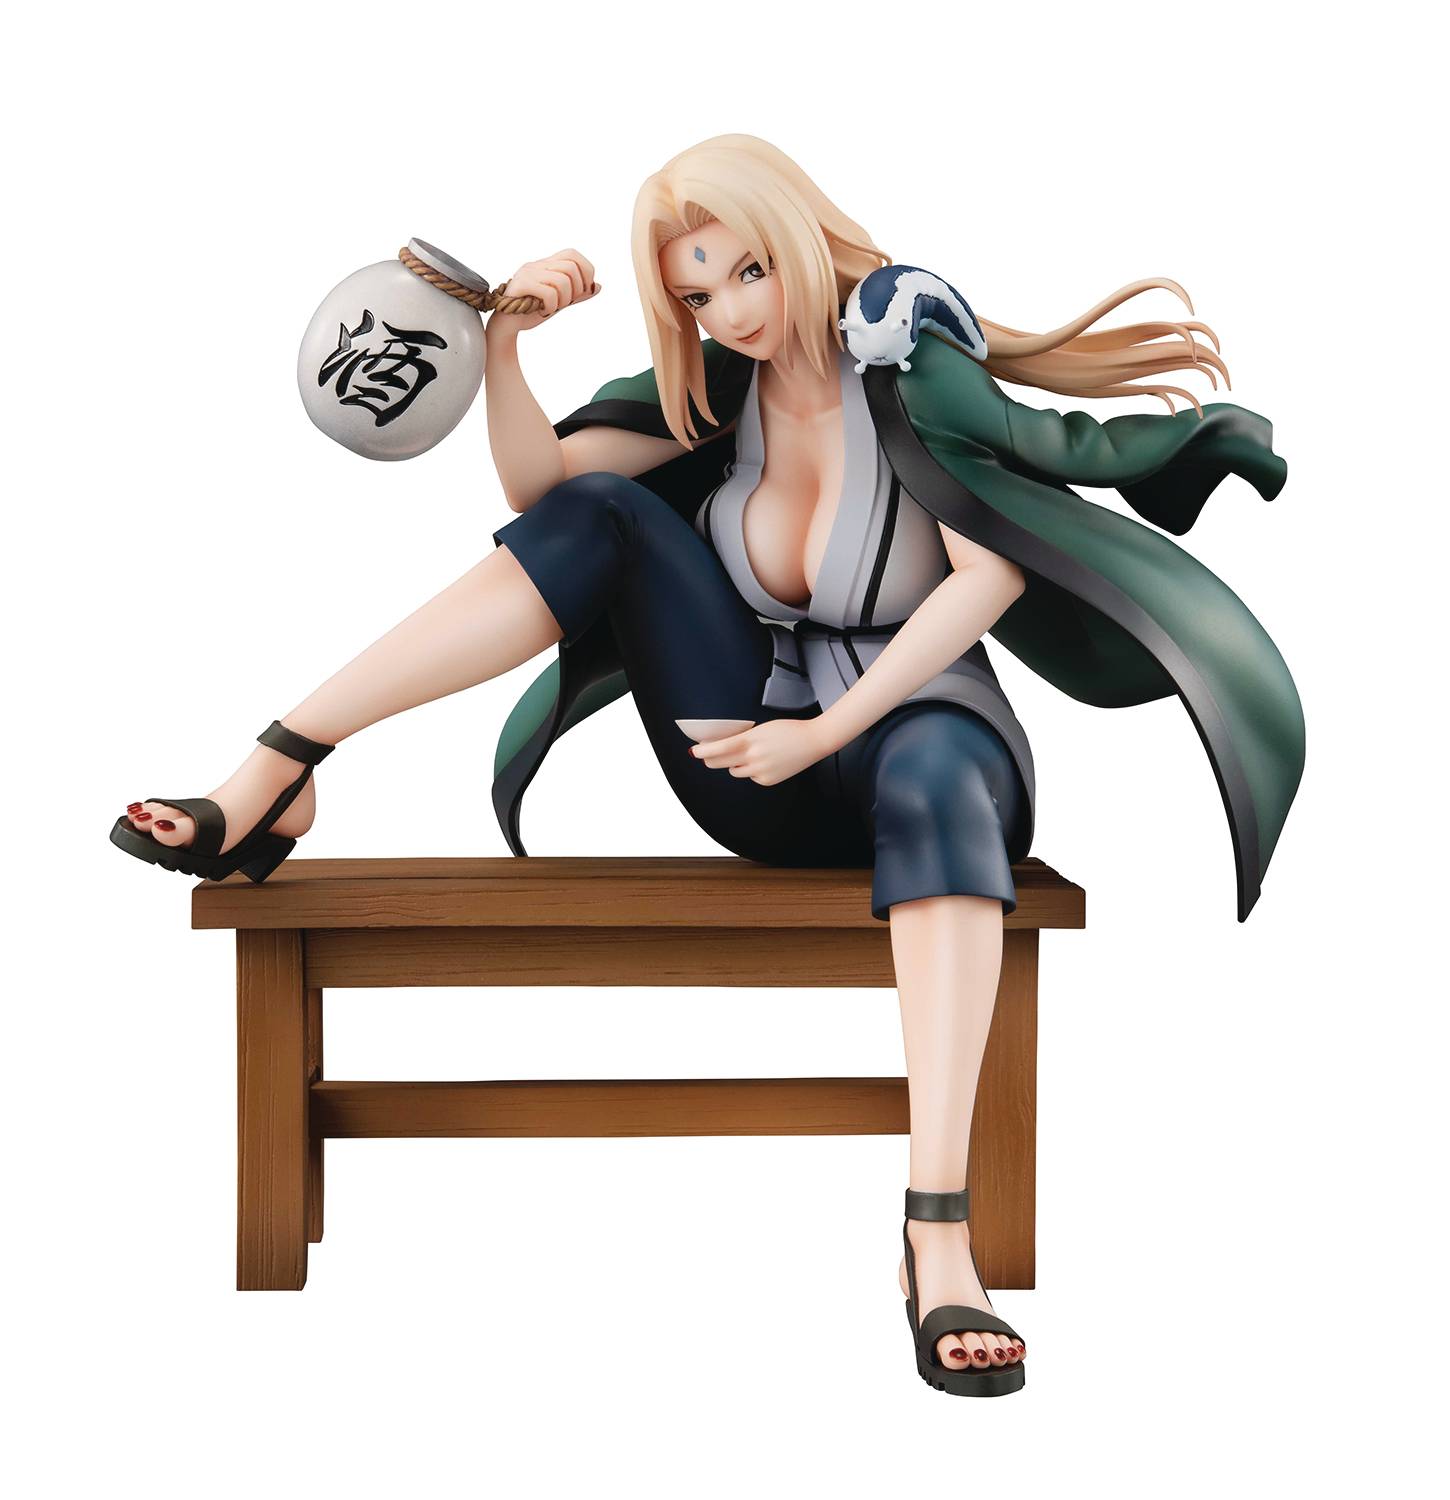 Tsunade features a smiling expression and flowing hair